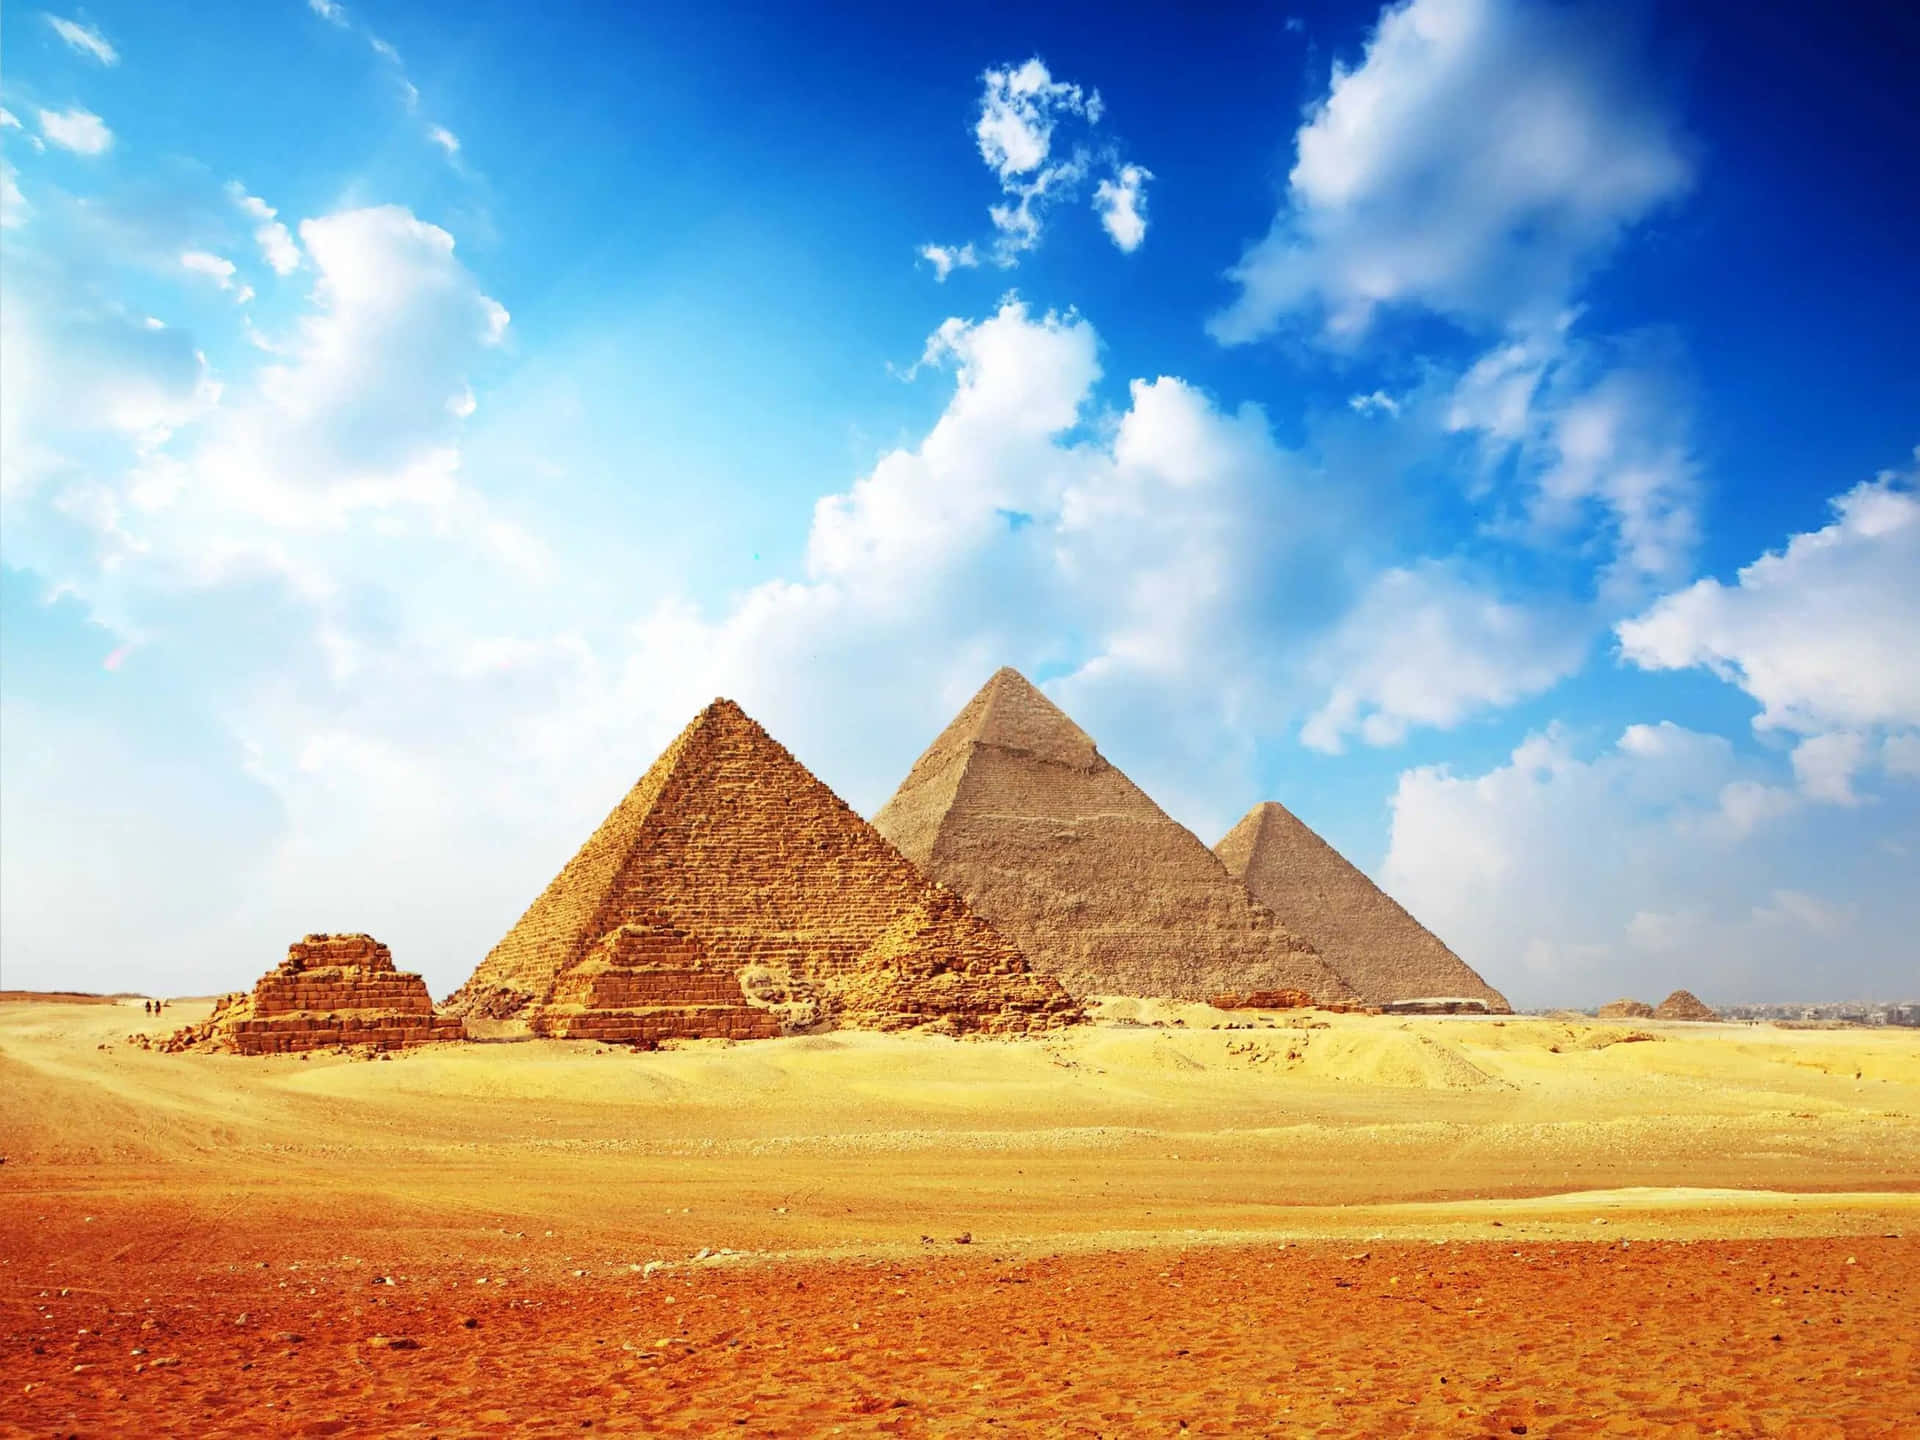 The Pyramids Of Giza In Egypt